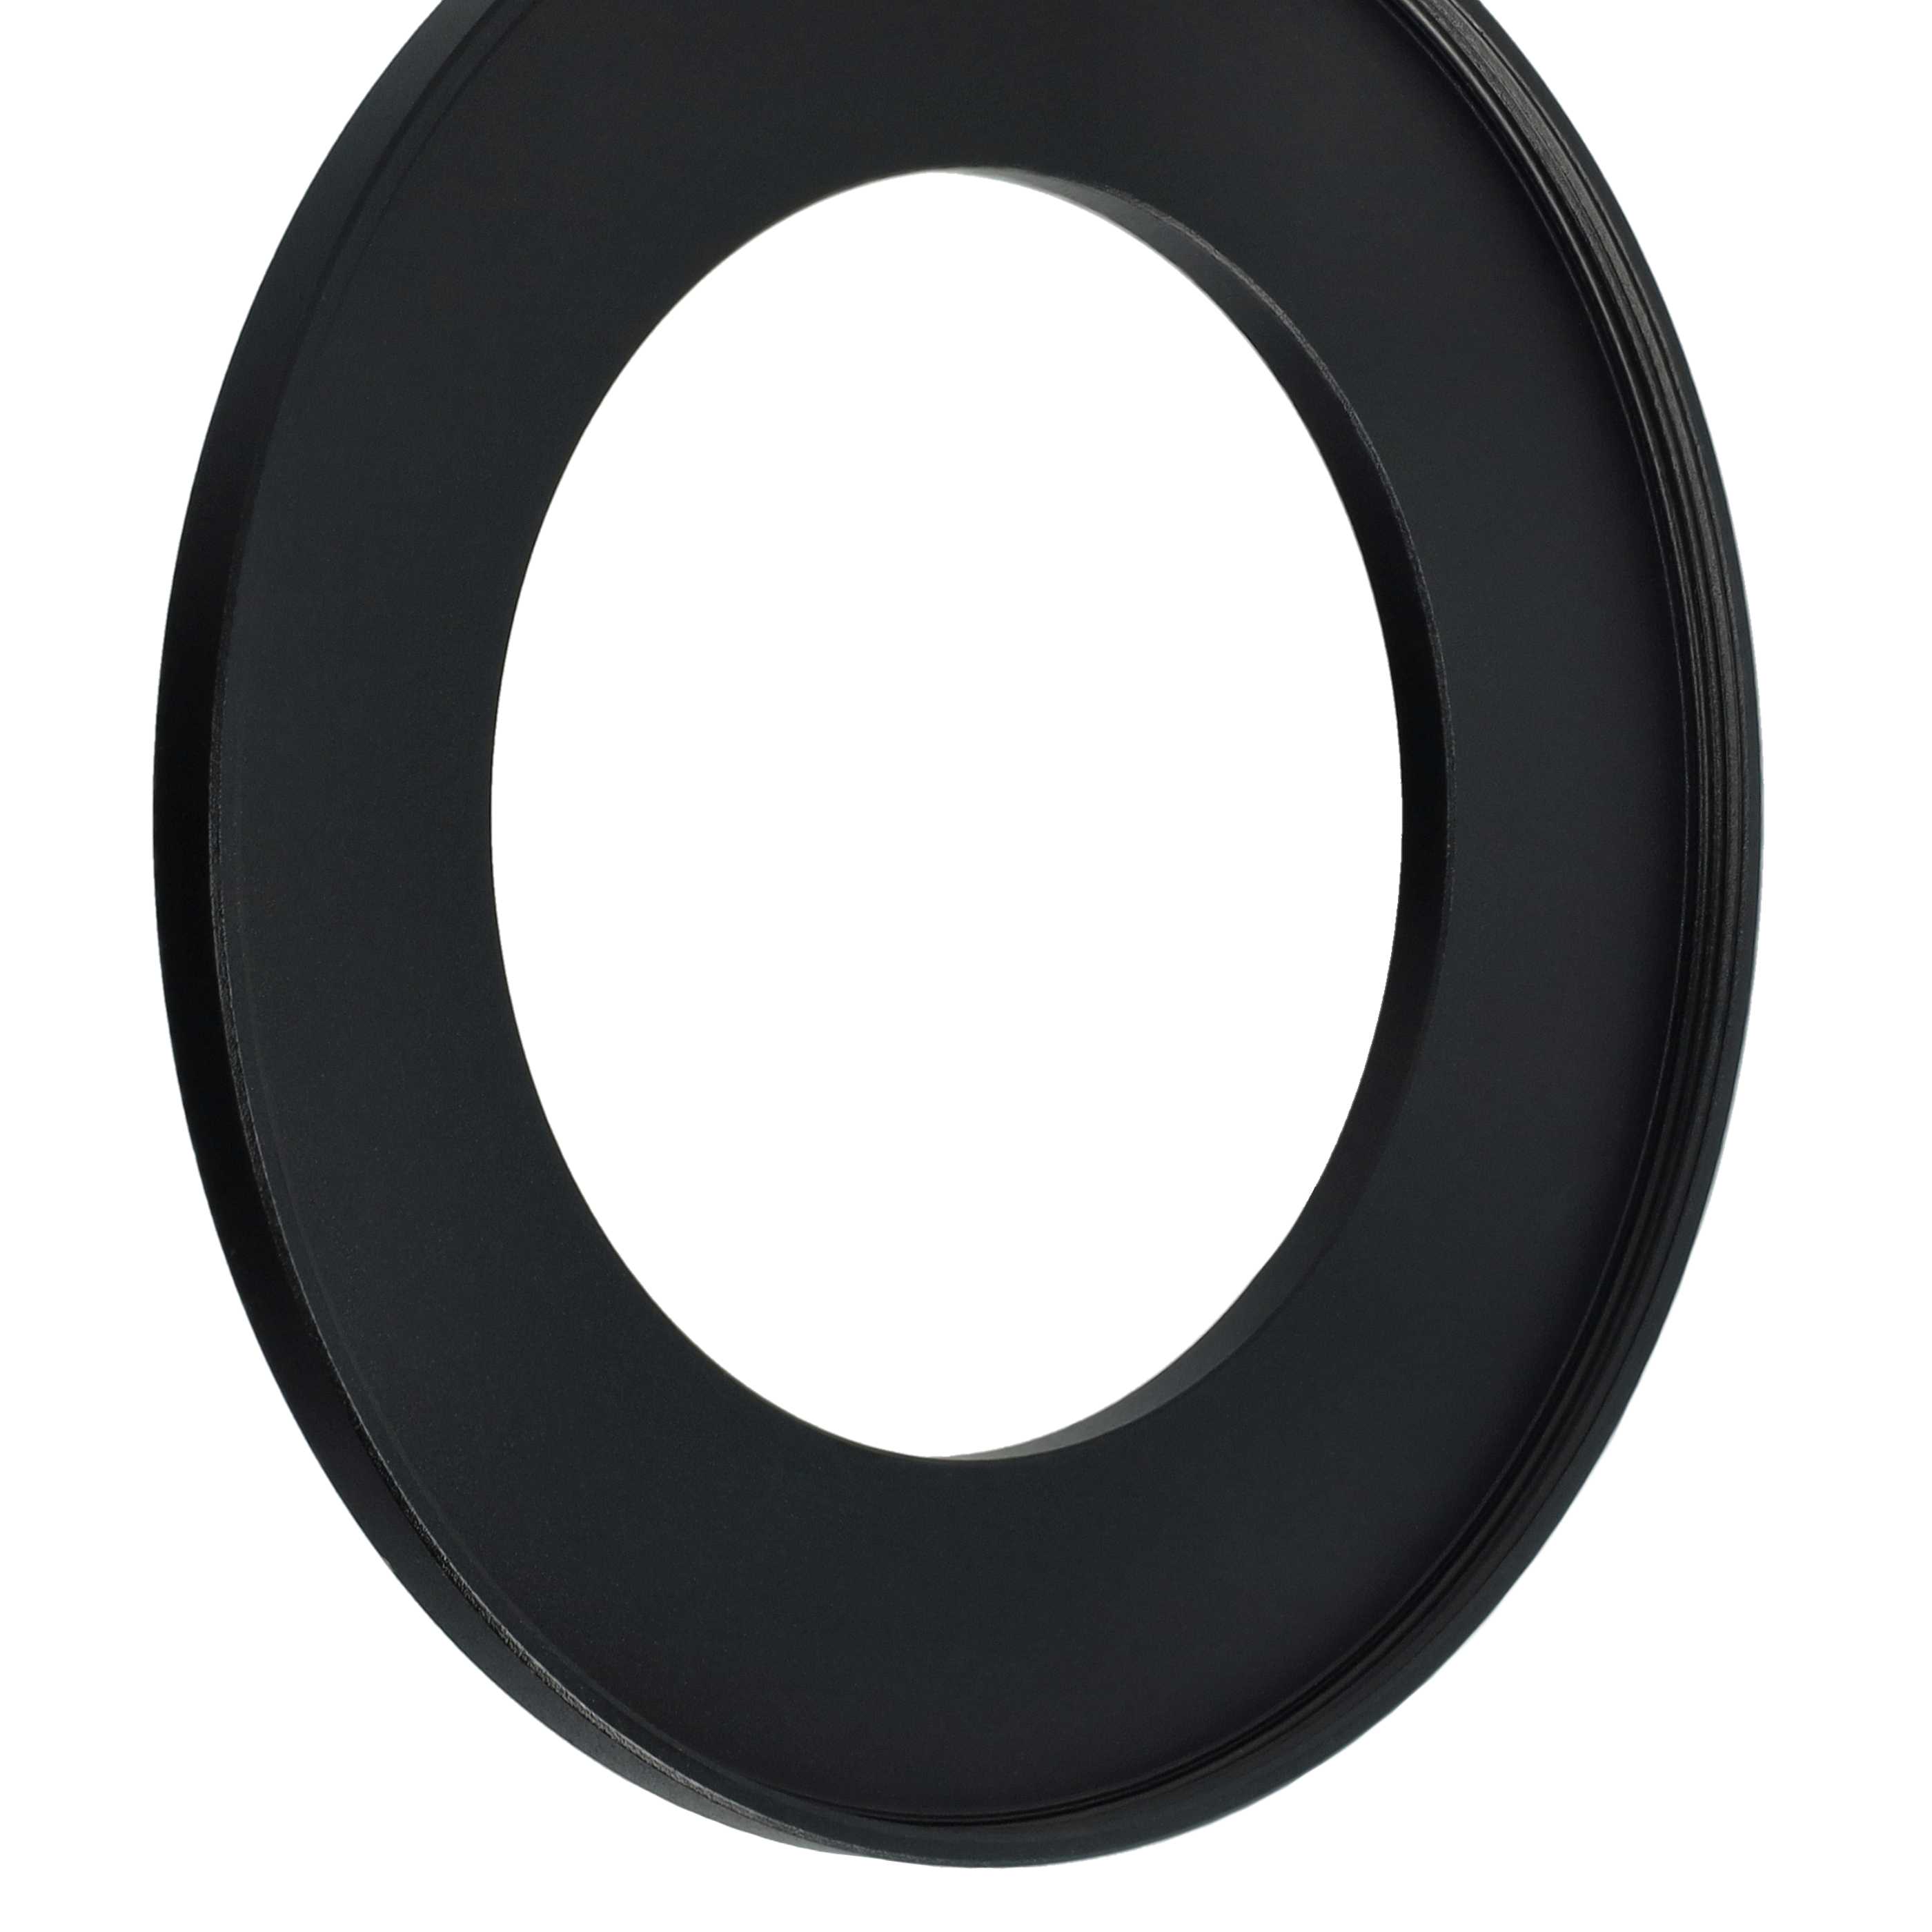 Step-Up Ring Adapter of 55 mm to 82 mmfor various Camera Lens - Filter Adapter